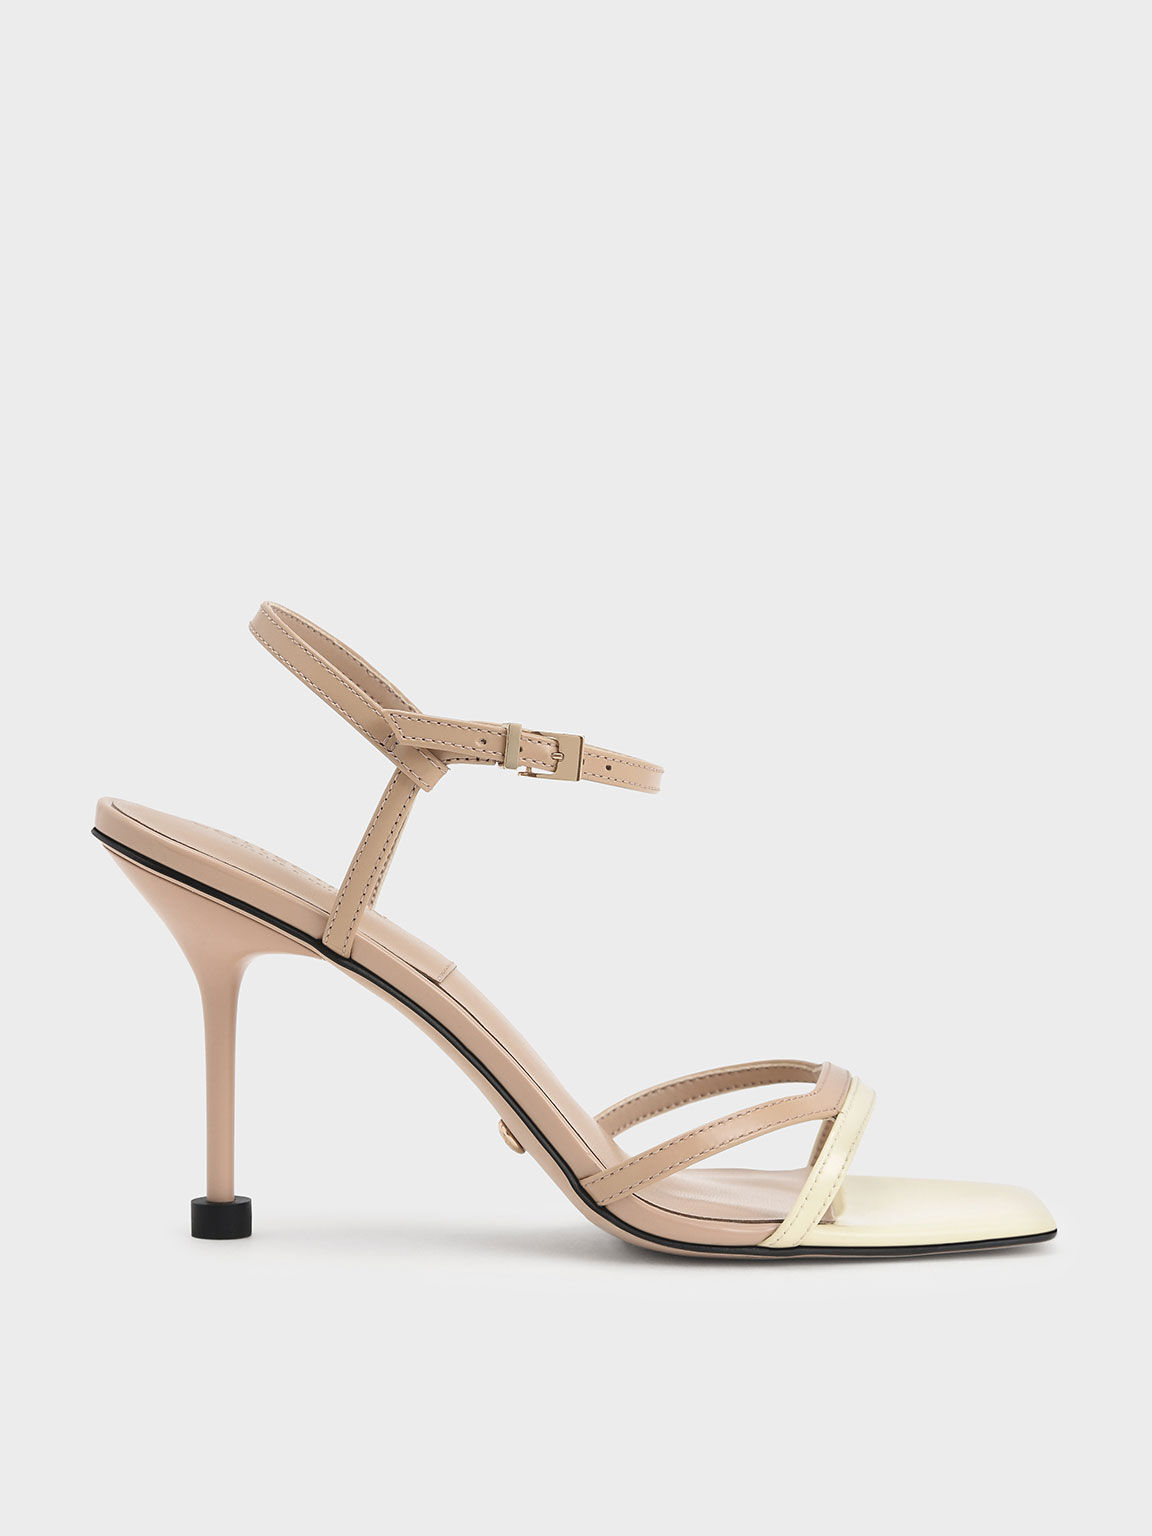 Patent Leather Ankle-Strap Stiletto Sandals, Nude, hi-res